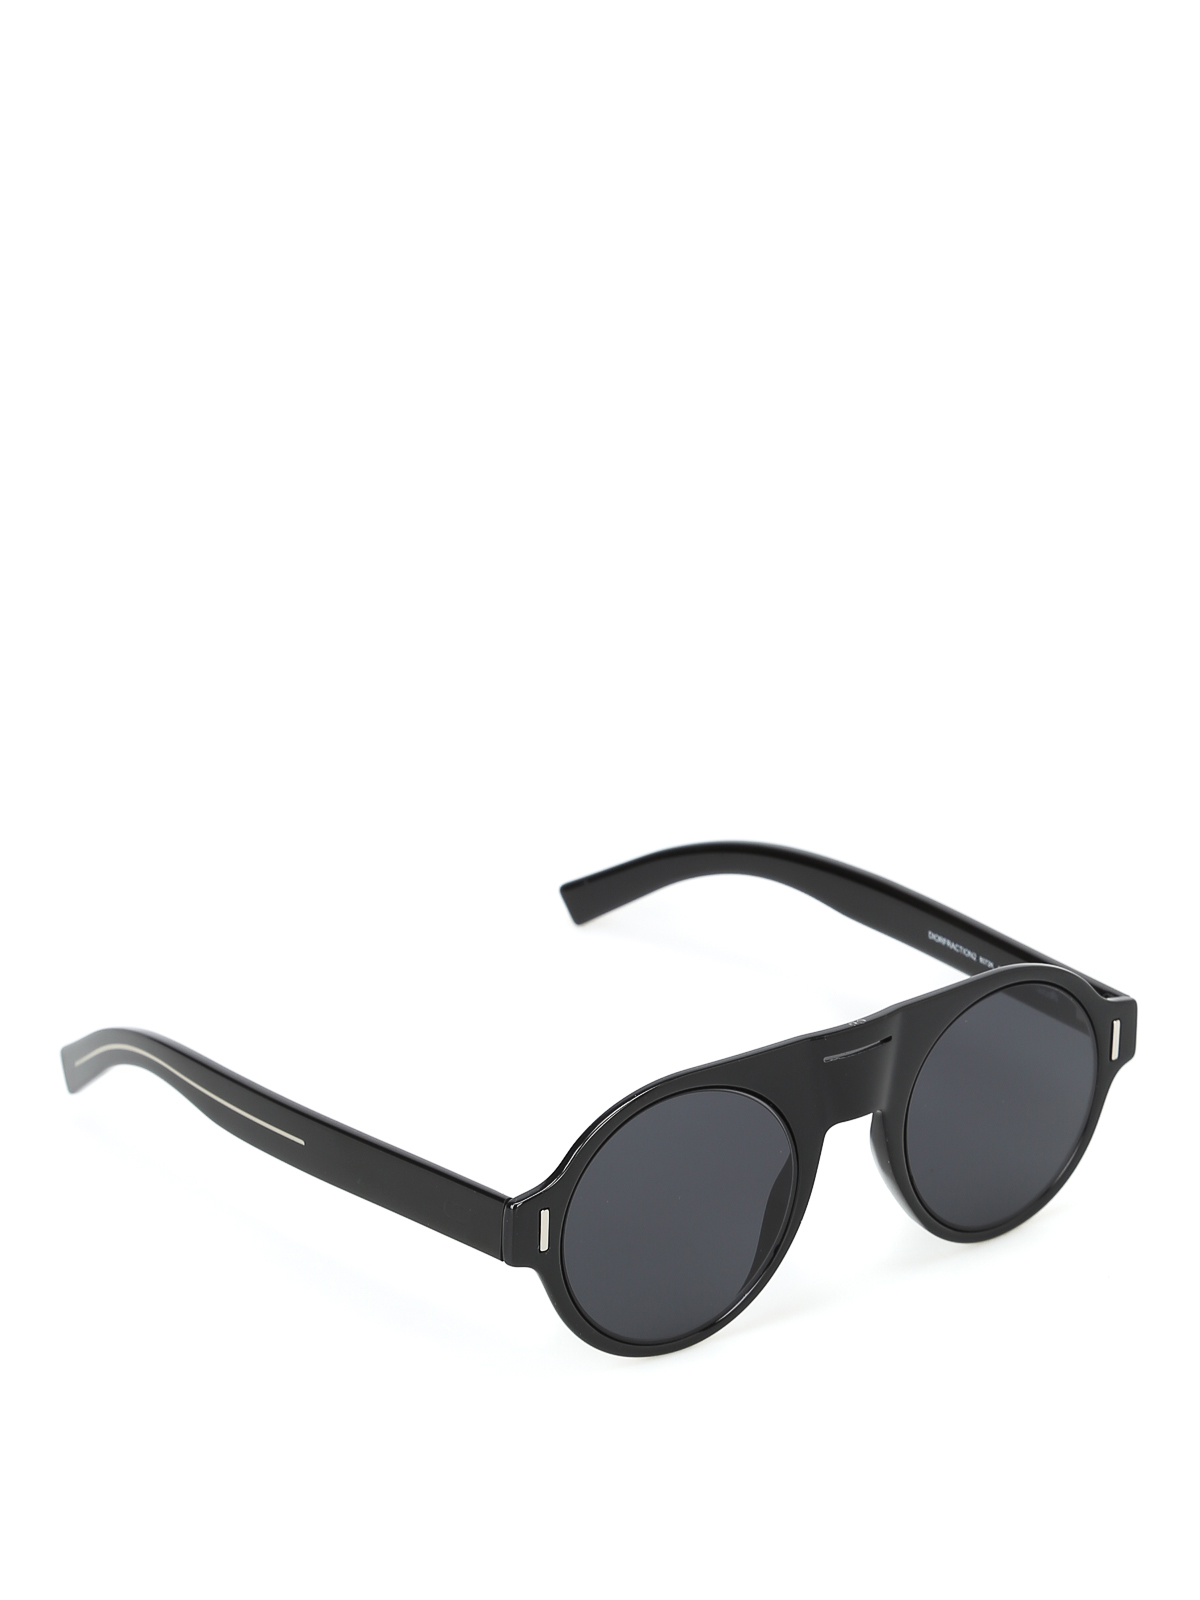 Dior Homme Dior Fraction 4 Sunglasses  FREE Shipping  SOLD OUT